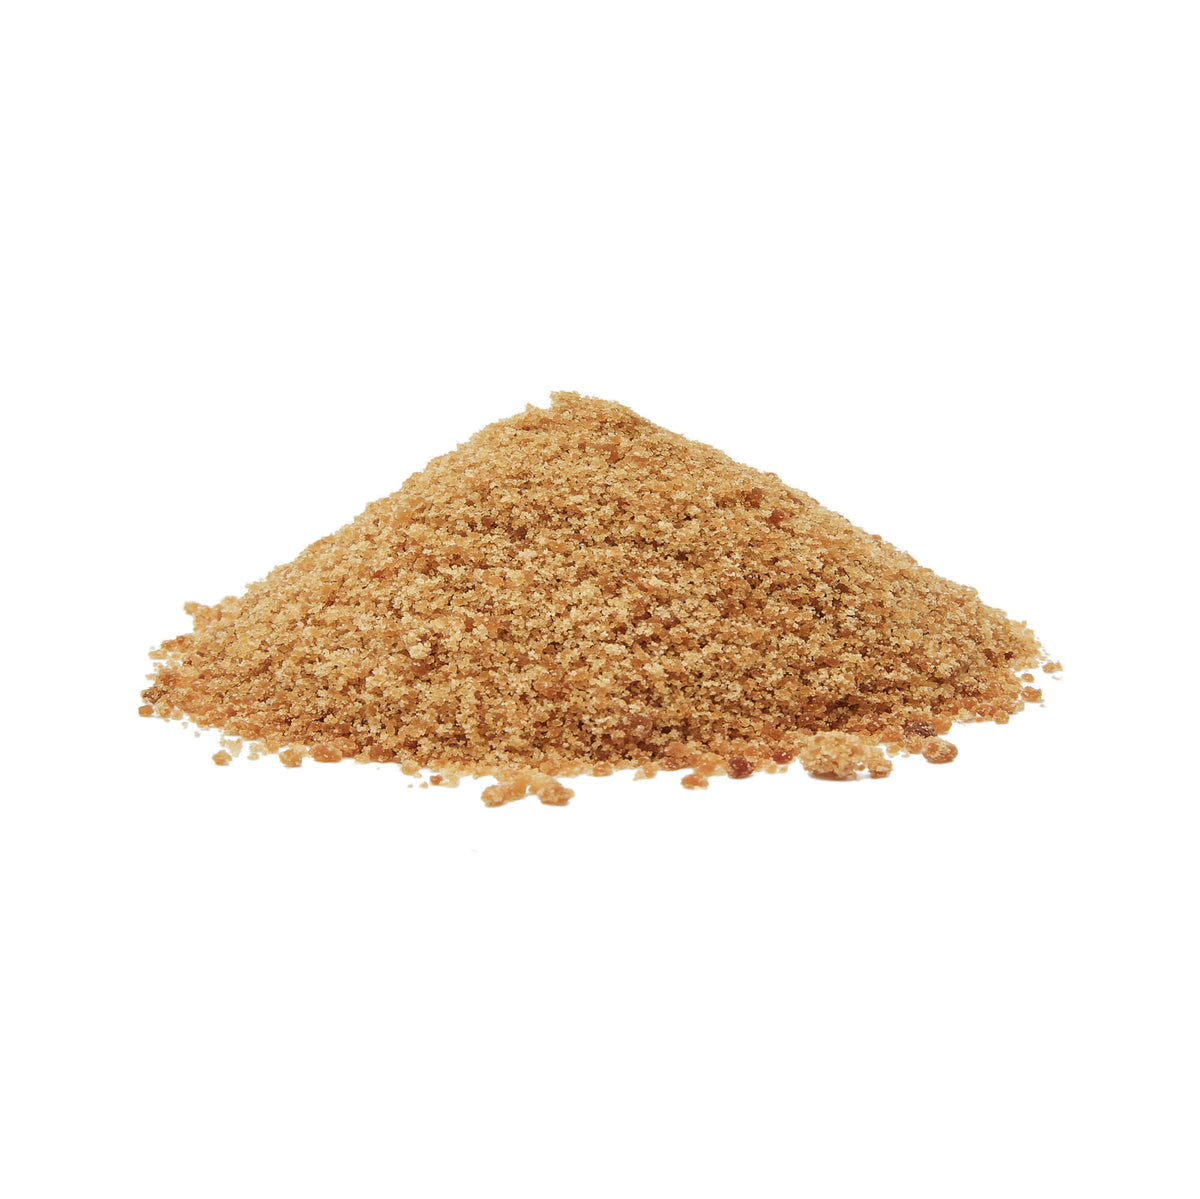 Organic Sun-Dried Cane Juice Crystals | Raw Living UK | Raw Foods | Natural Sweeteners | Raw Living Organic Sun-Dried Raw Cane Juice Crystals are made from 100% certified Organic Sugar Cane. A Raw, Mineral-Rich, Low GI &amp; delicious Natural Sweetener.